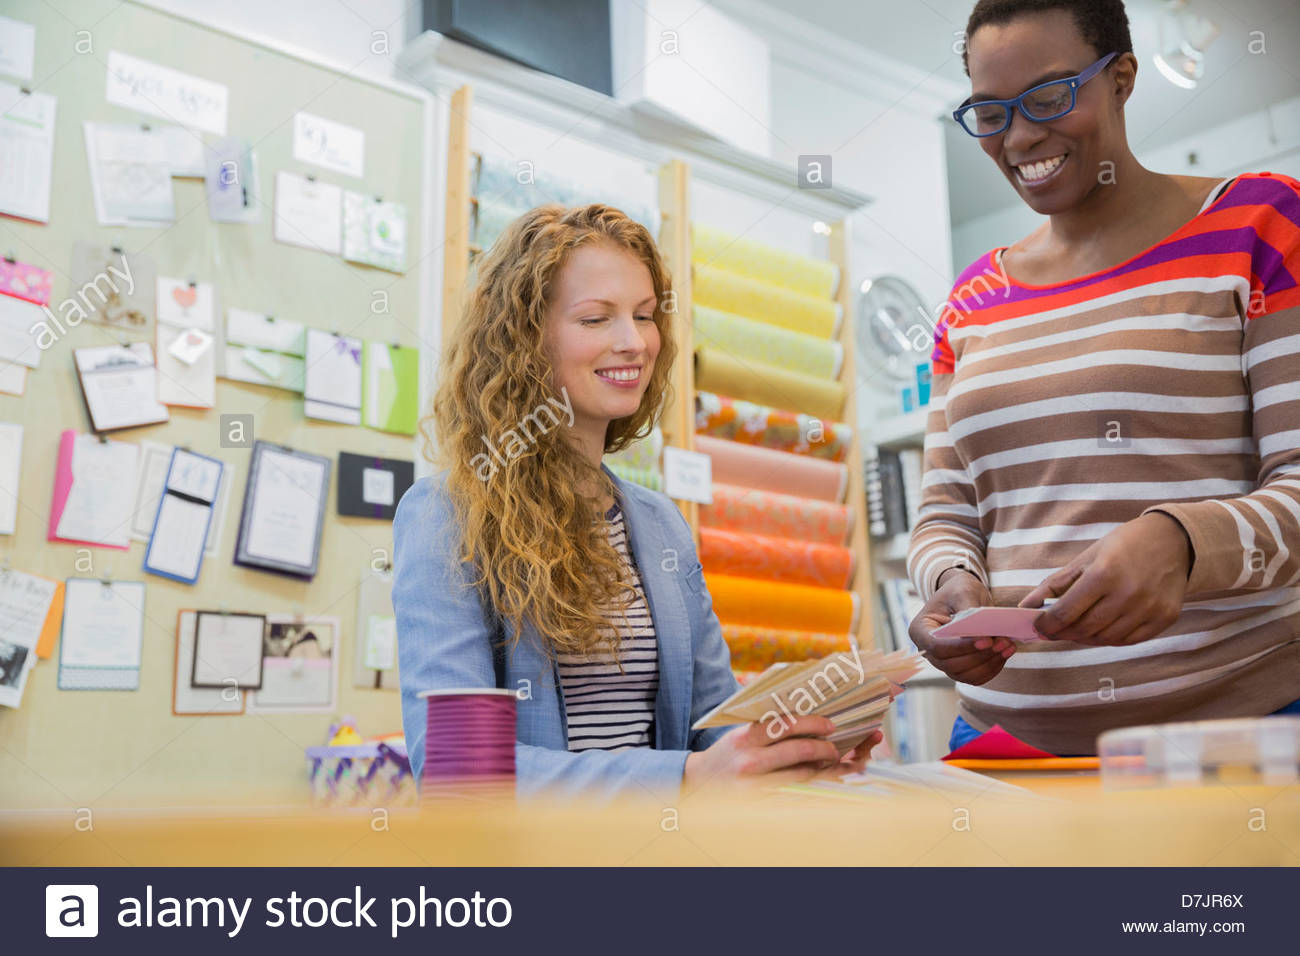 Female small business owner assisting customer with options Stock Photo